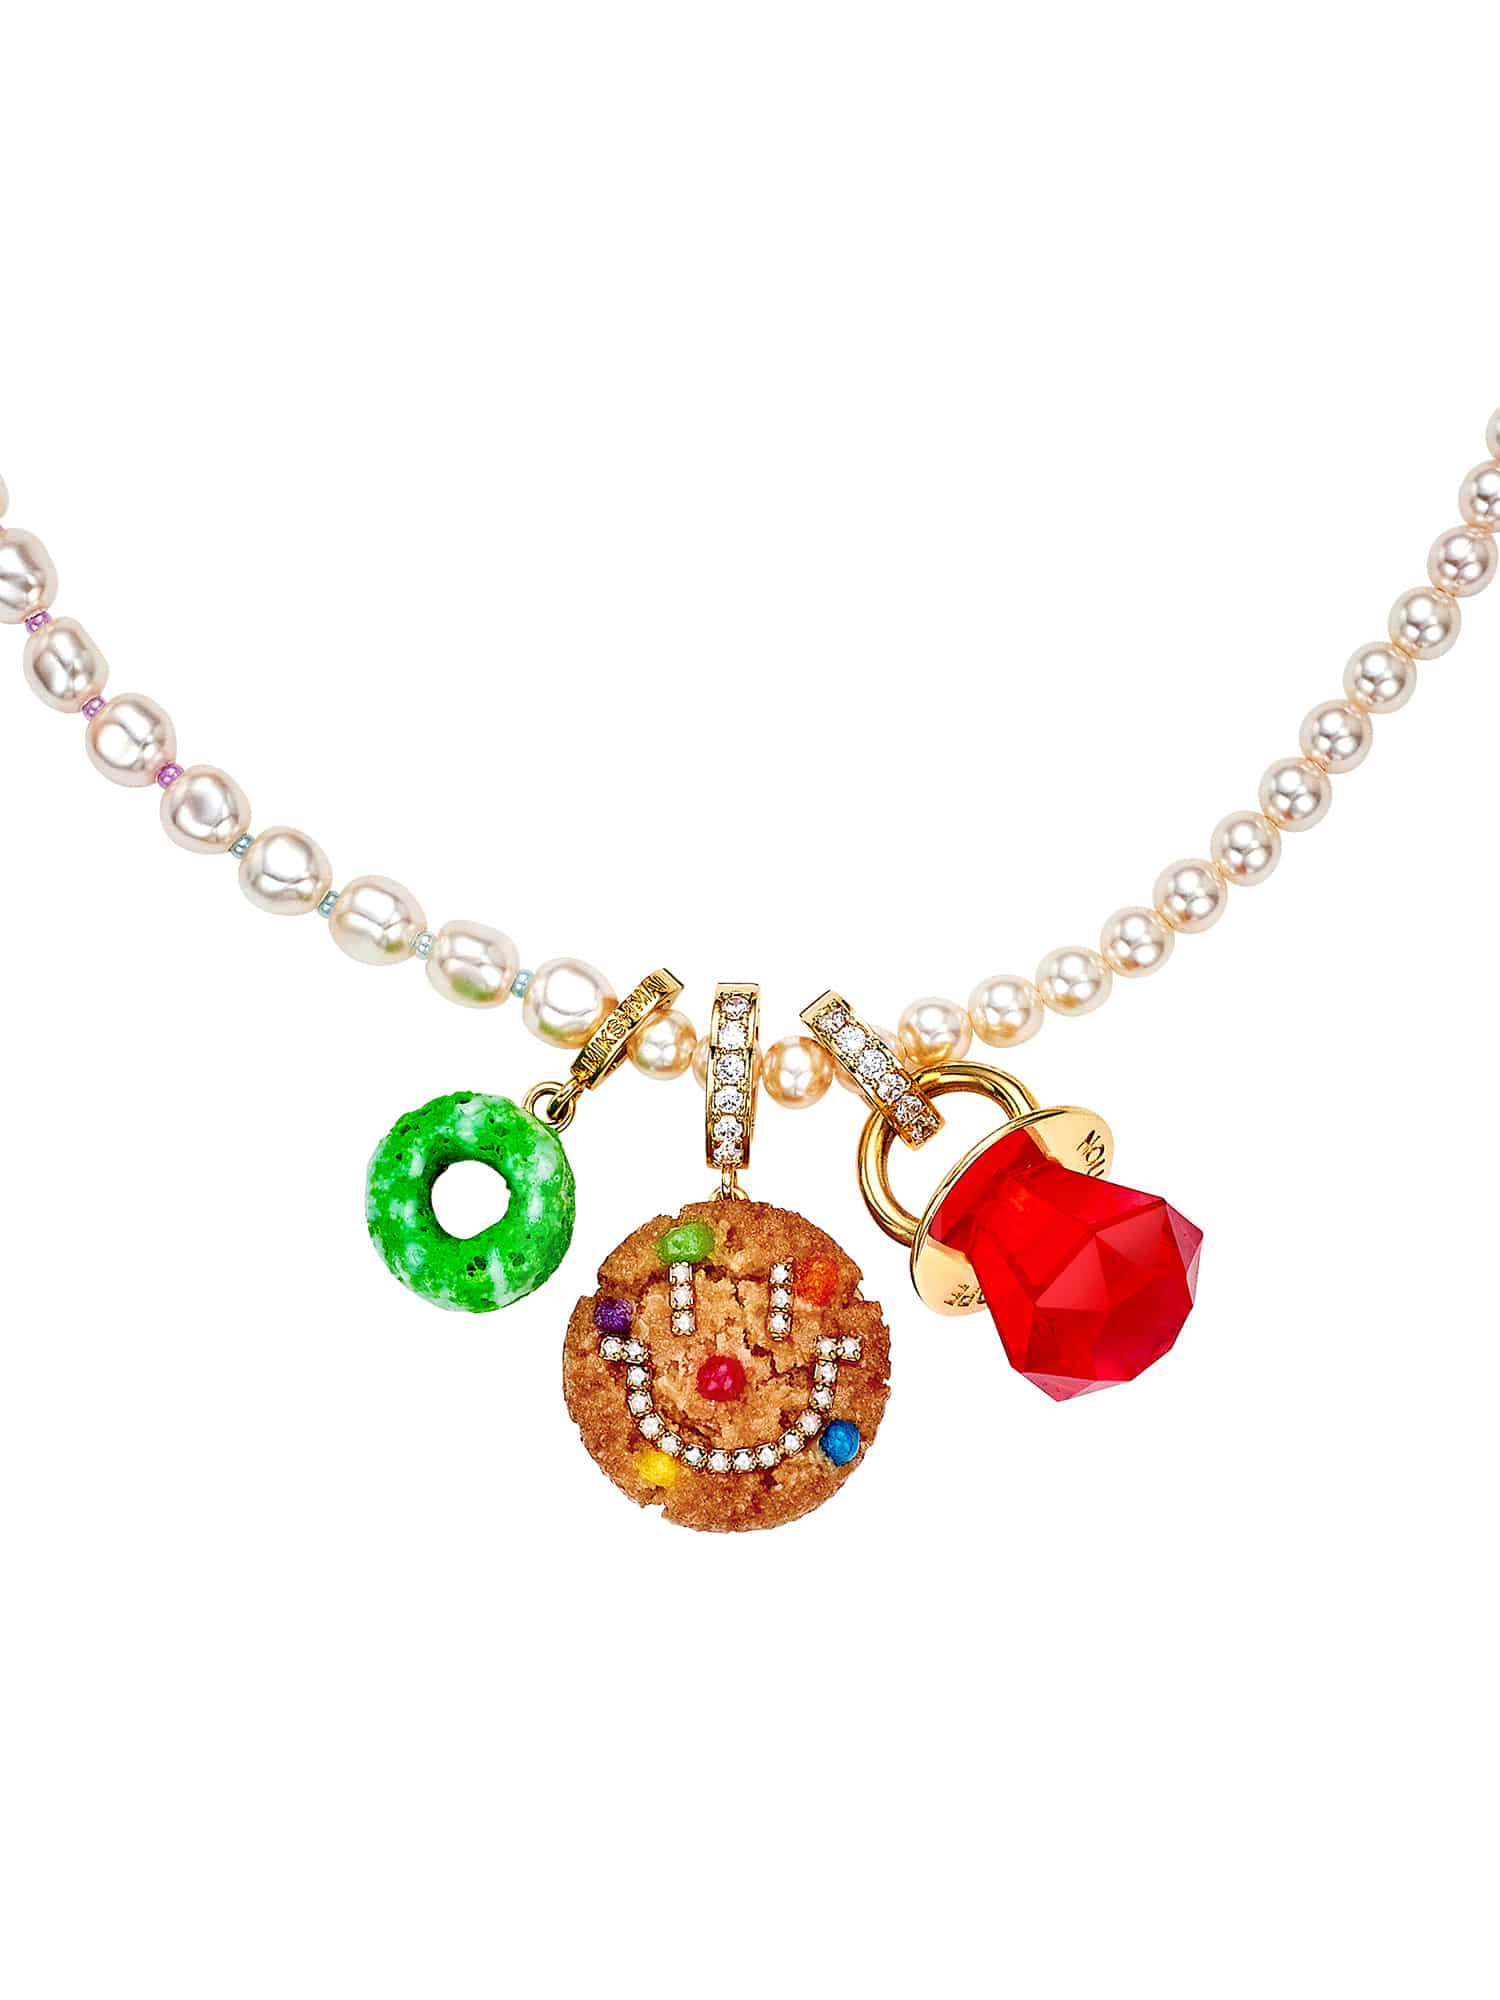 PIERROT COOKIE CHARM NECKLACE